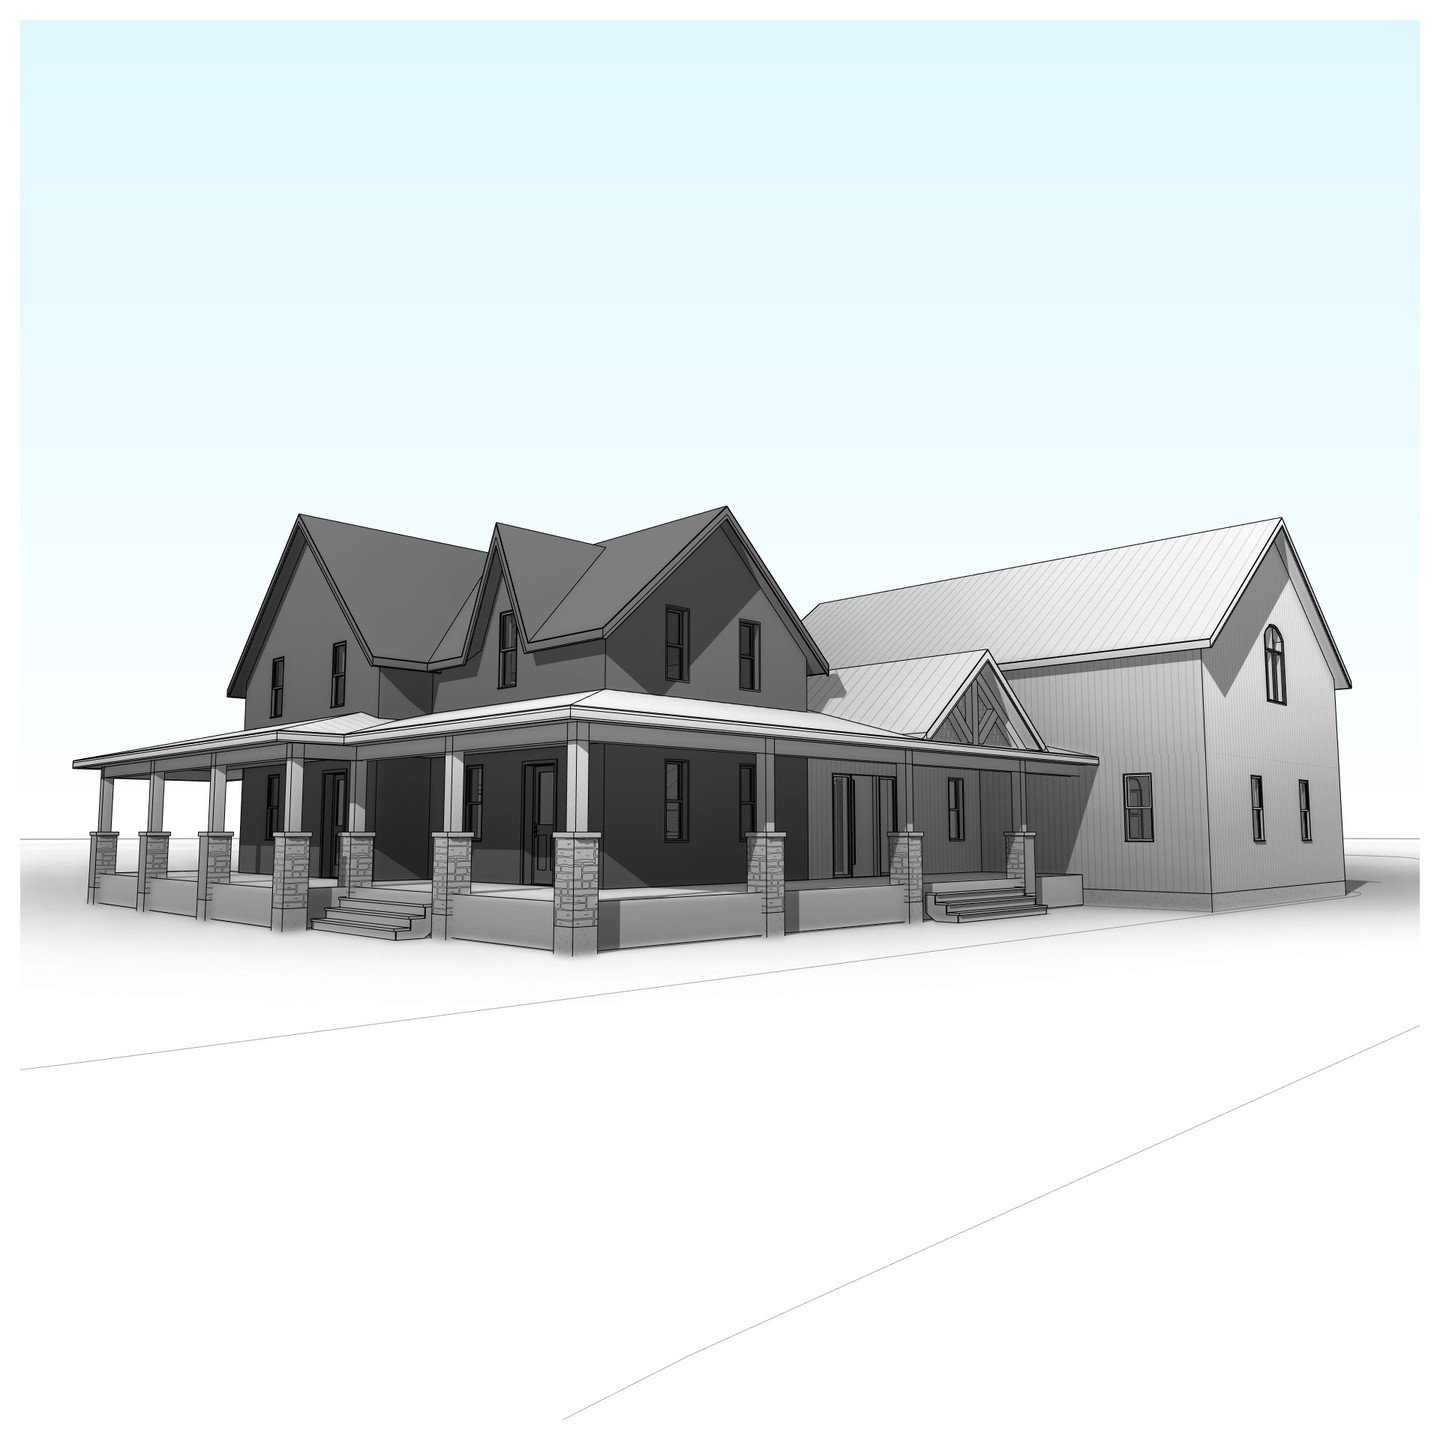 1 storey addition, including wrap-around porch, foyer/mudroom/office link, attached 3 car garage and loft storage. #addition #garage #loft #foyer #mudroom #office #wraparoundporch #farmhouse #traditional #timber #perspective #revit #architecture #aja